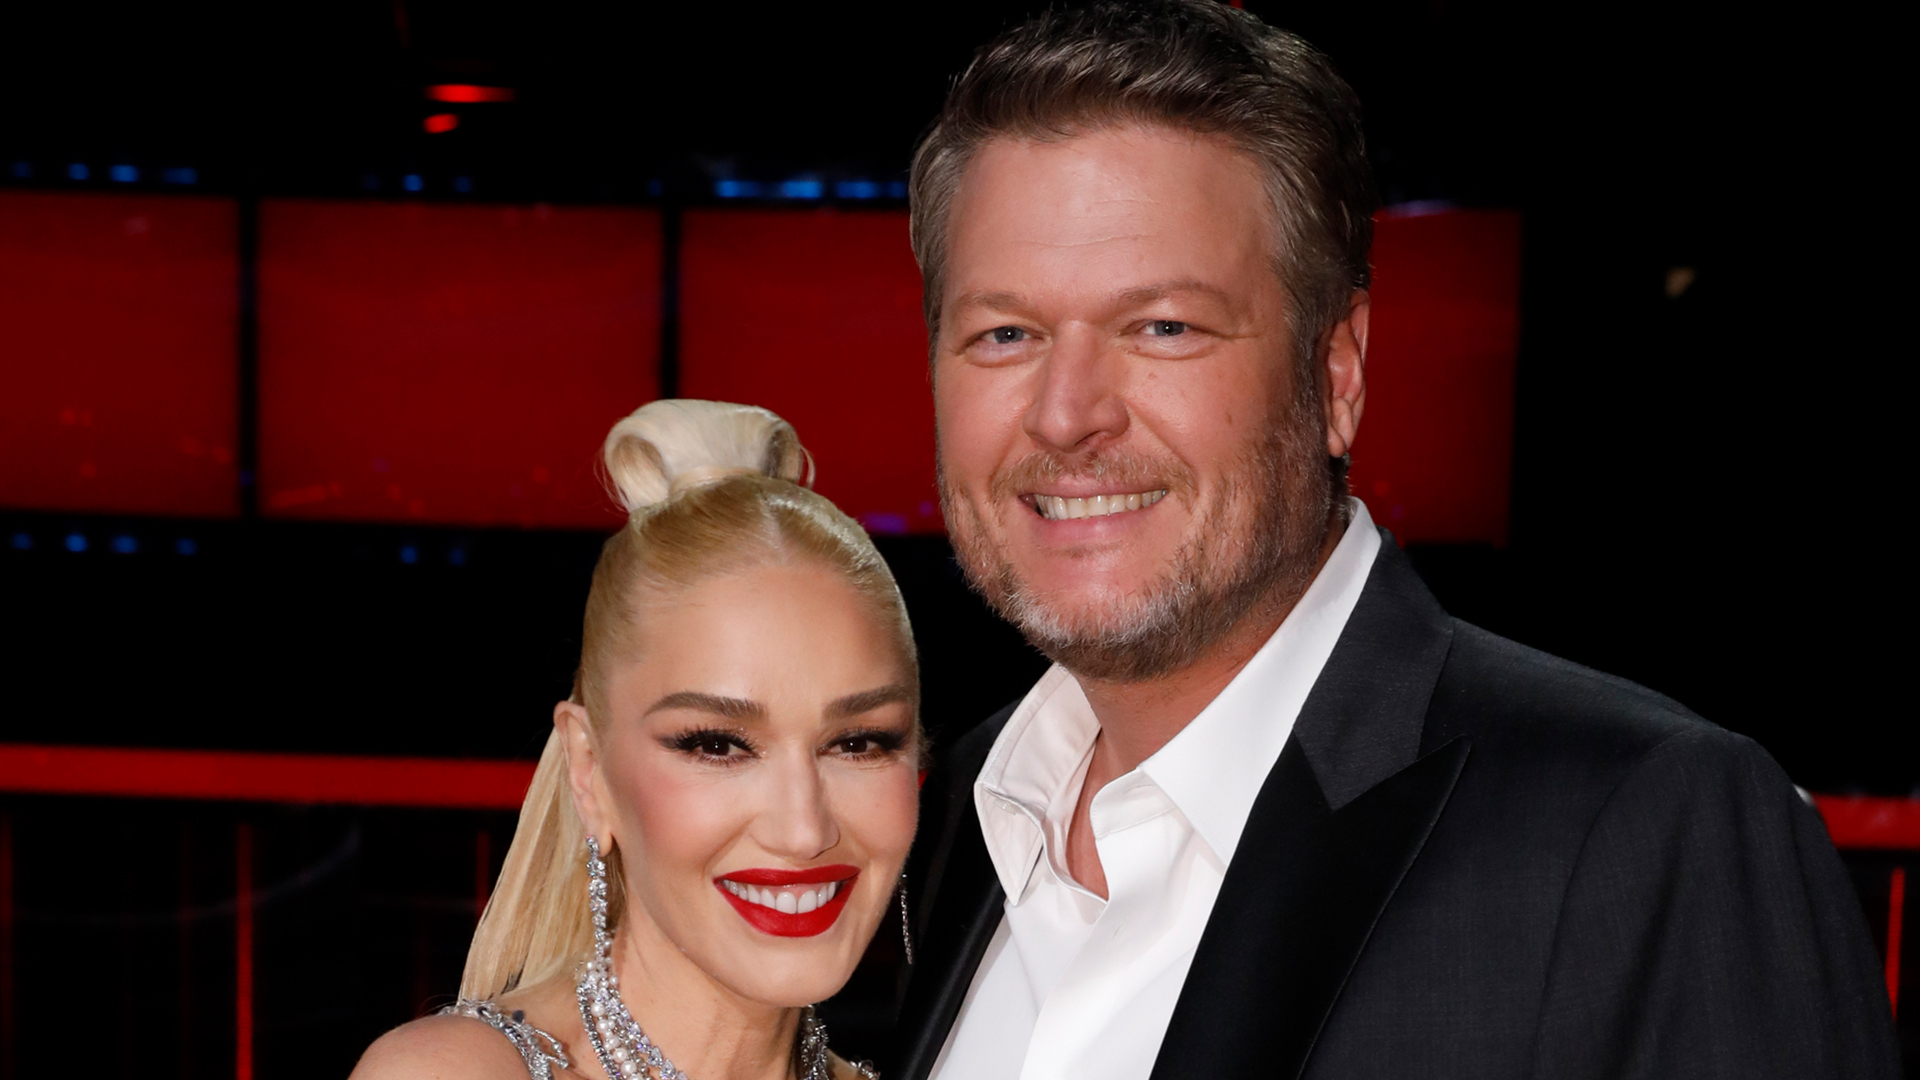 Gwen Stefani reveals private handwritten note and gift from husband Blake Shelton after she responds to divorce rumors